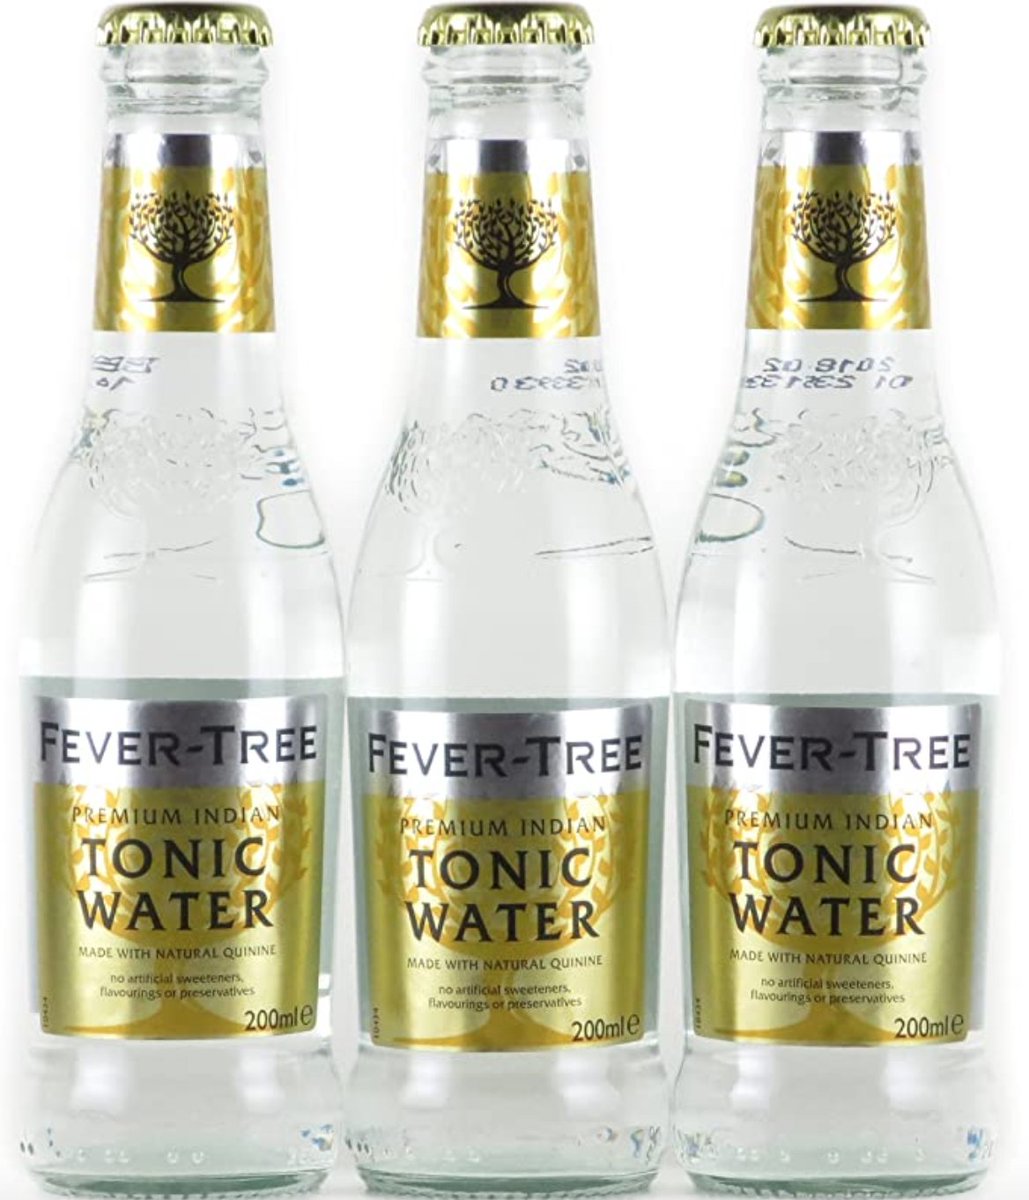 Anyway, if you want to try a homemade jinnantonikku with quinine in Japan you'll have to skip Asahi's Wilkinson's tonic water and try an import like Fever Tree. More on Japan G&Ts here from  @coldicott -- bottoms up!  https://www.japantimes.co.jp/life/2008/08/22/food/the-perfect-gin-and-tonic/